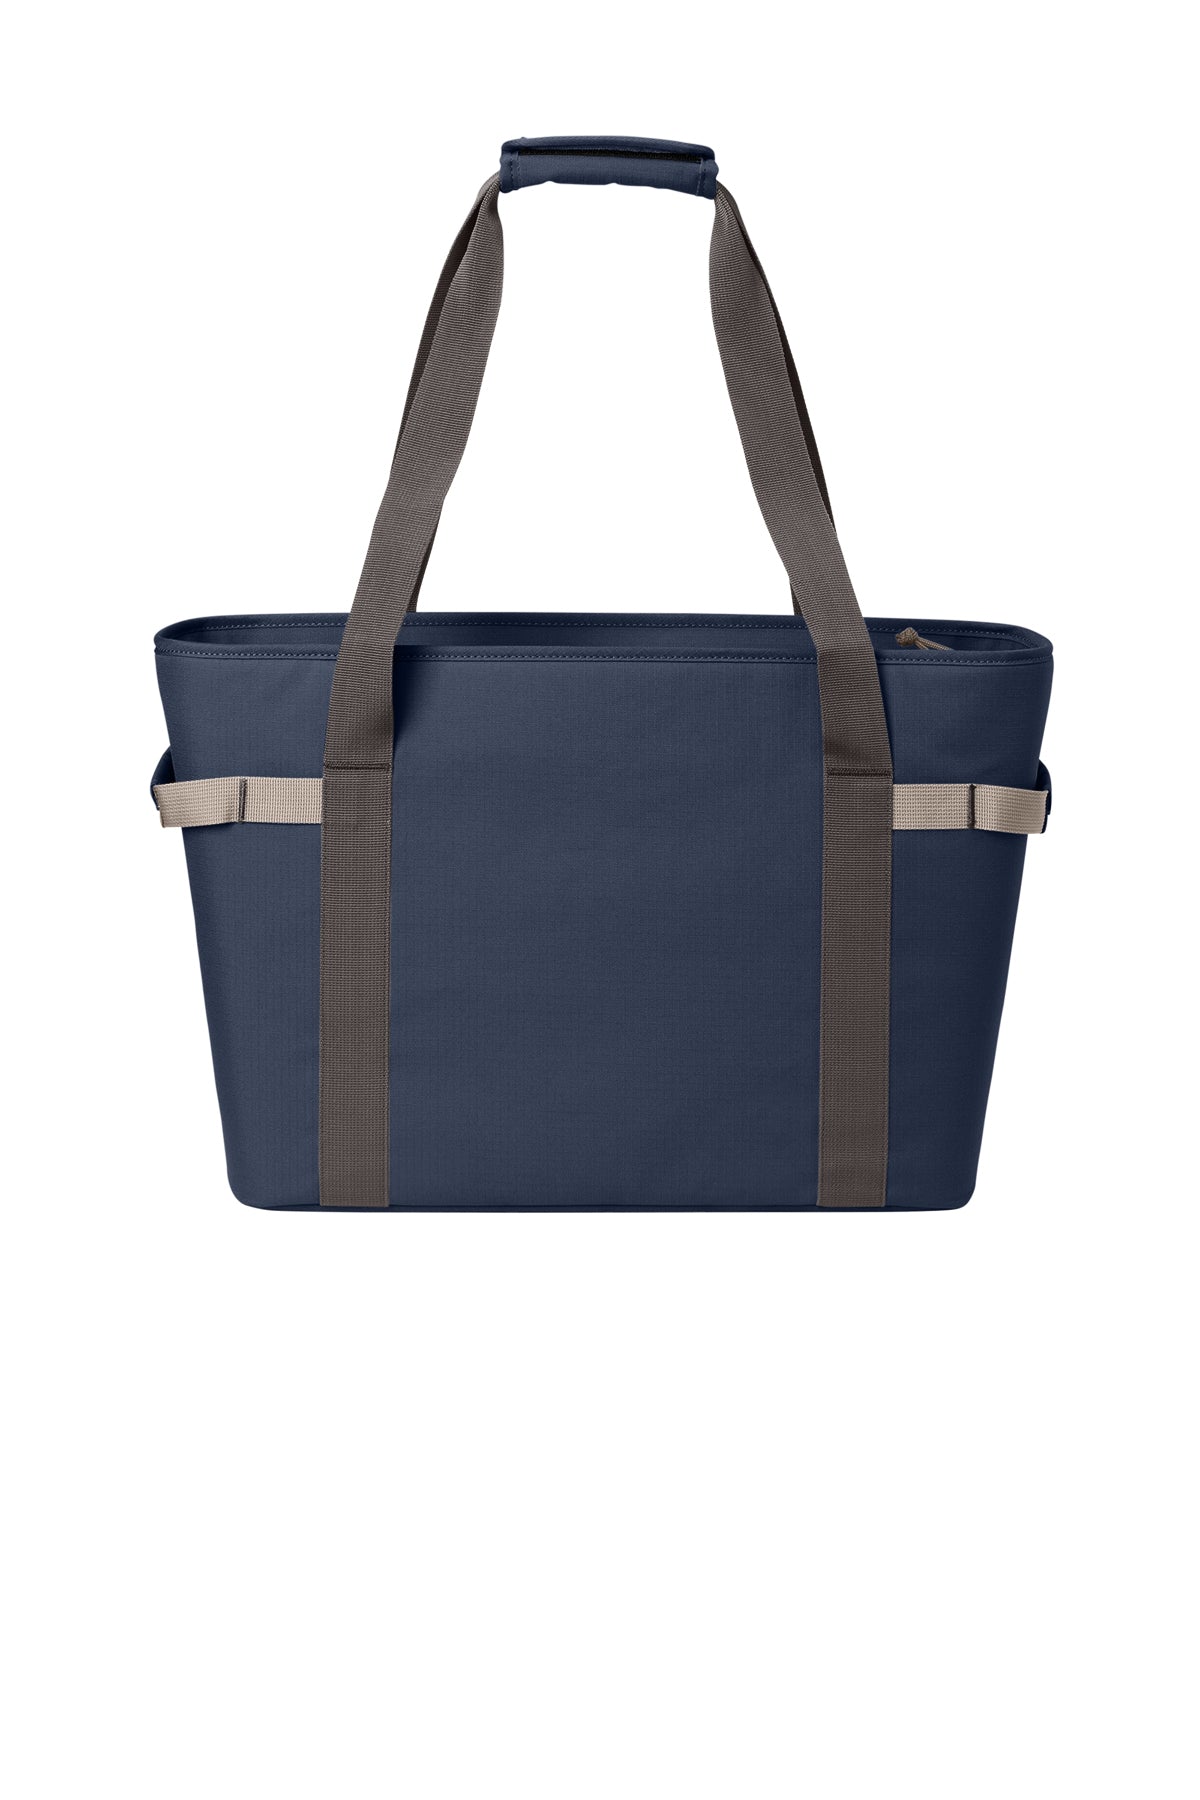 Eddie Bauer Max Cool Branded Tote Coolers, River Blue Navy/ Chrome